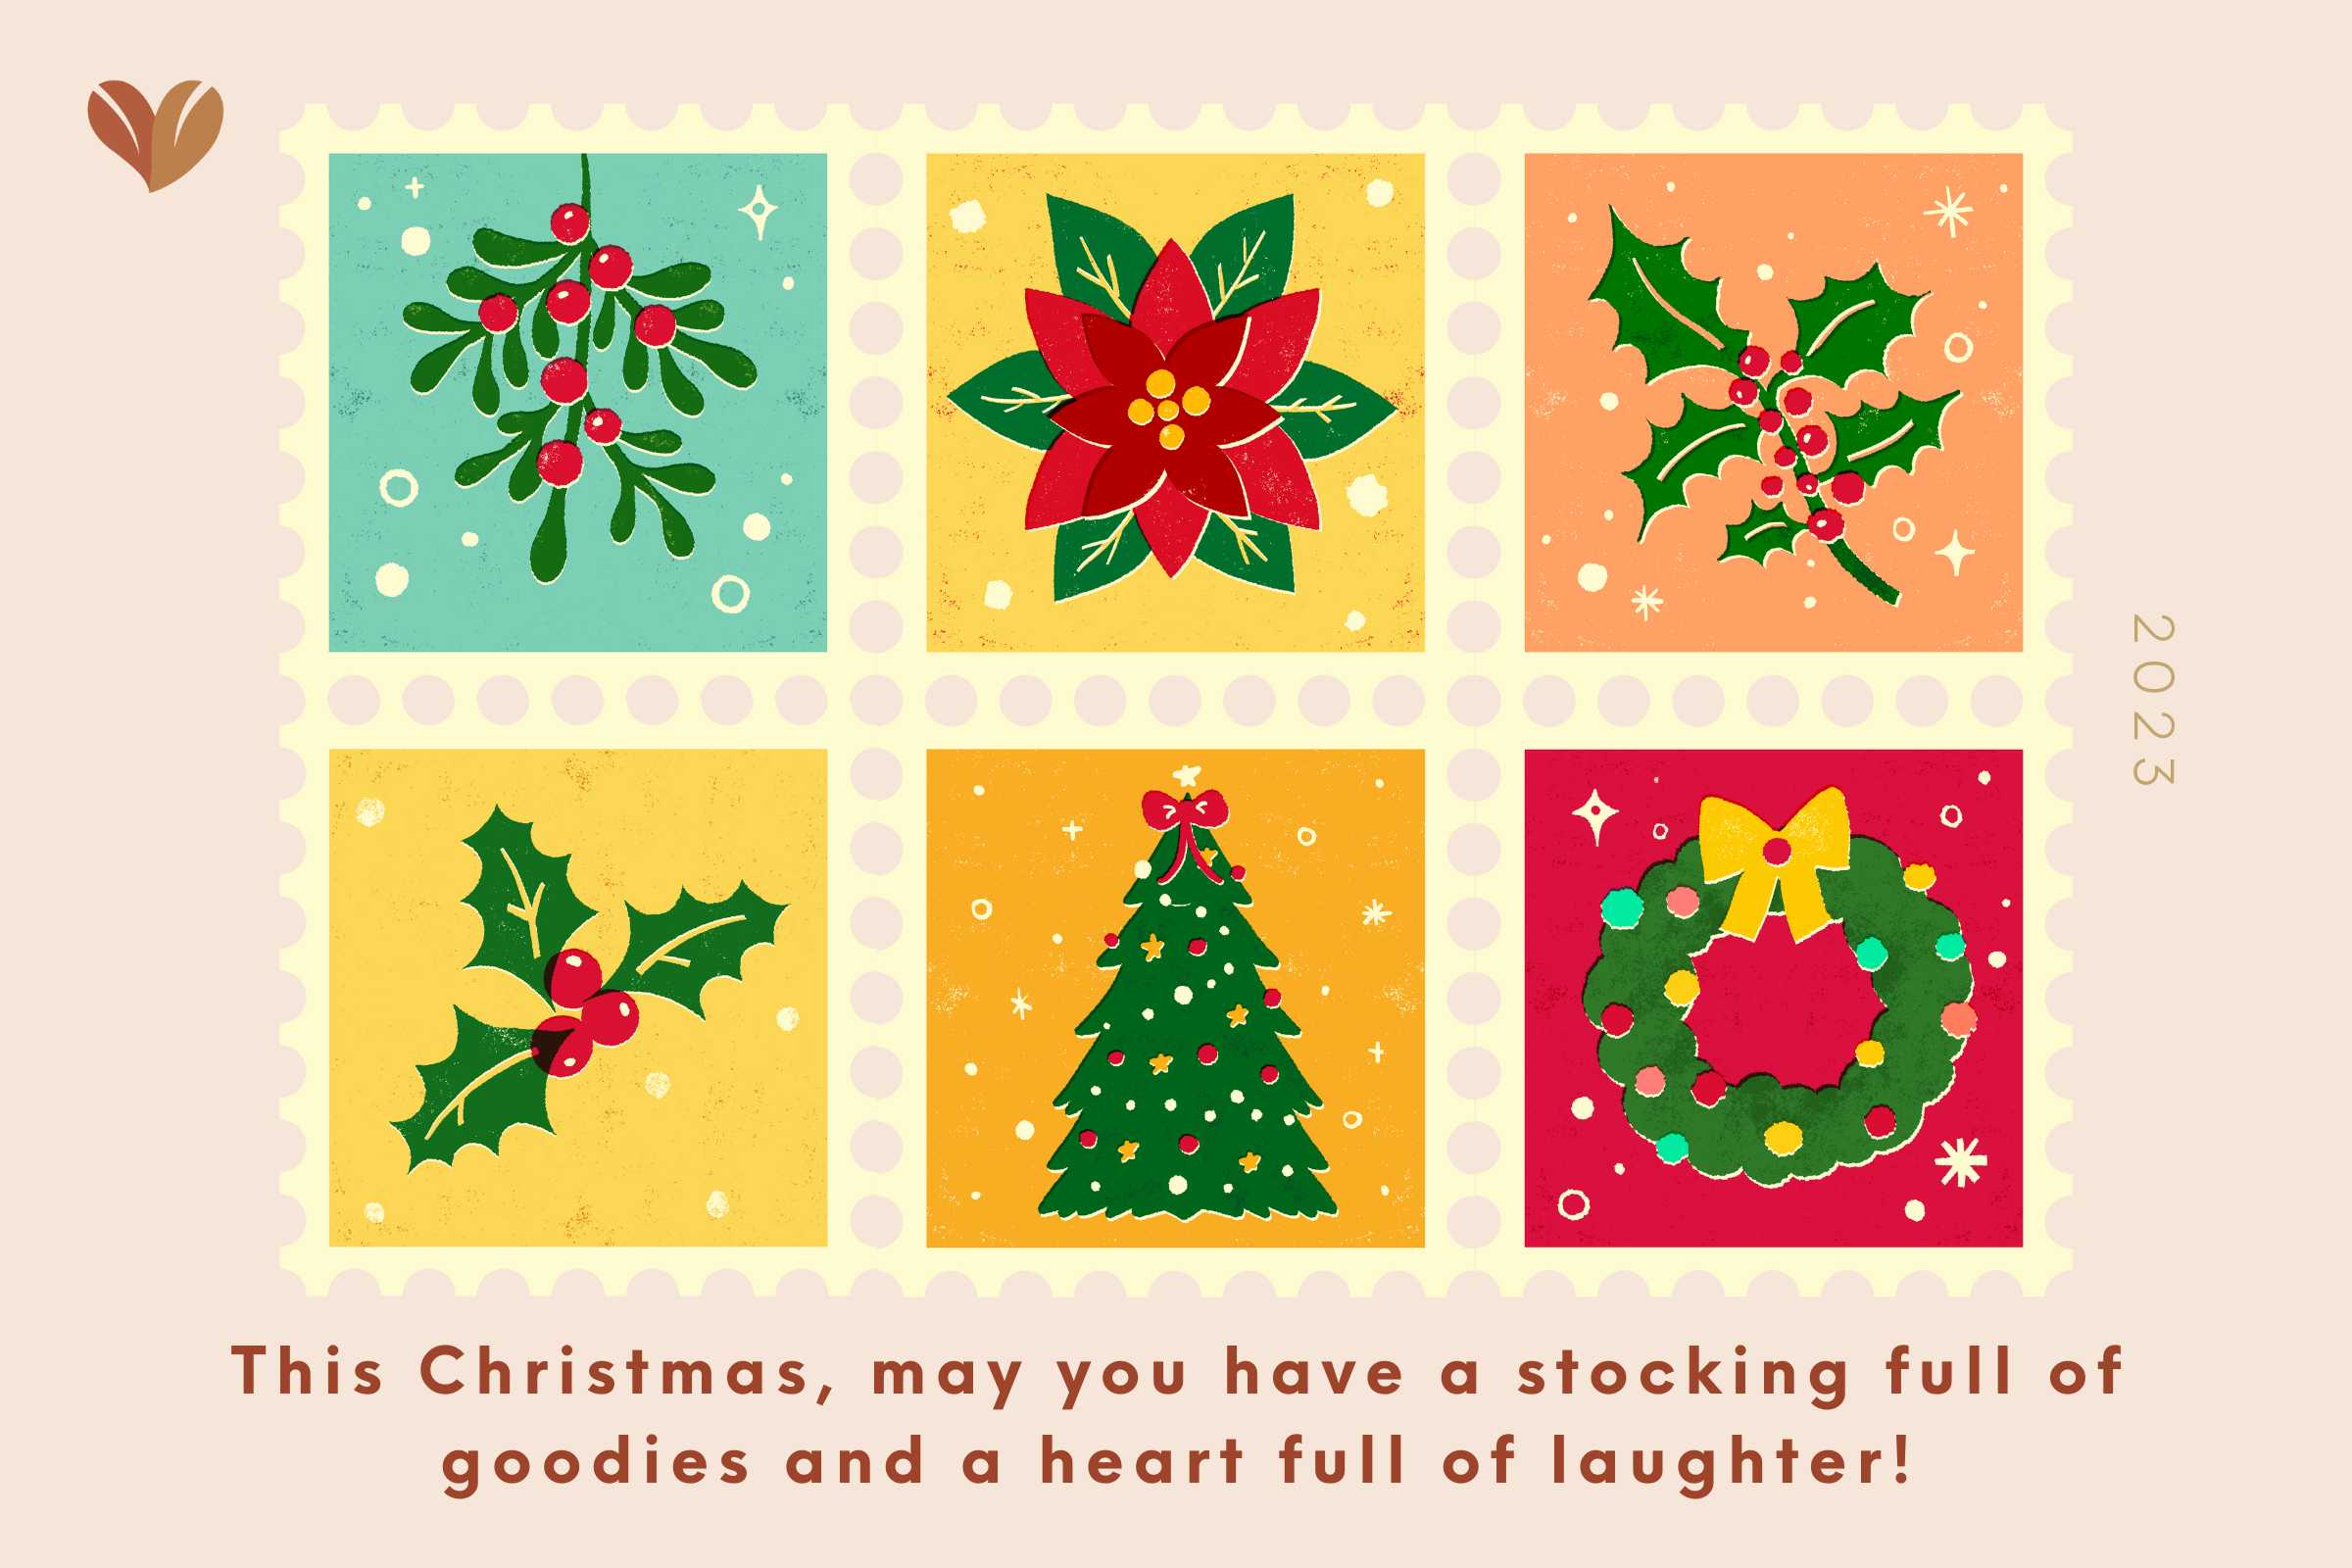 May your holiday season be filled with laughter